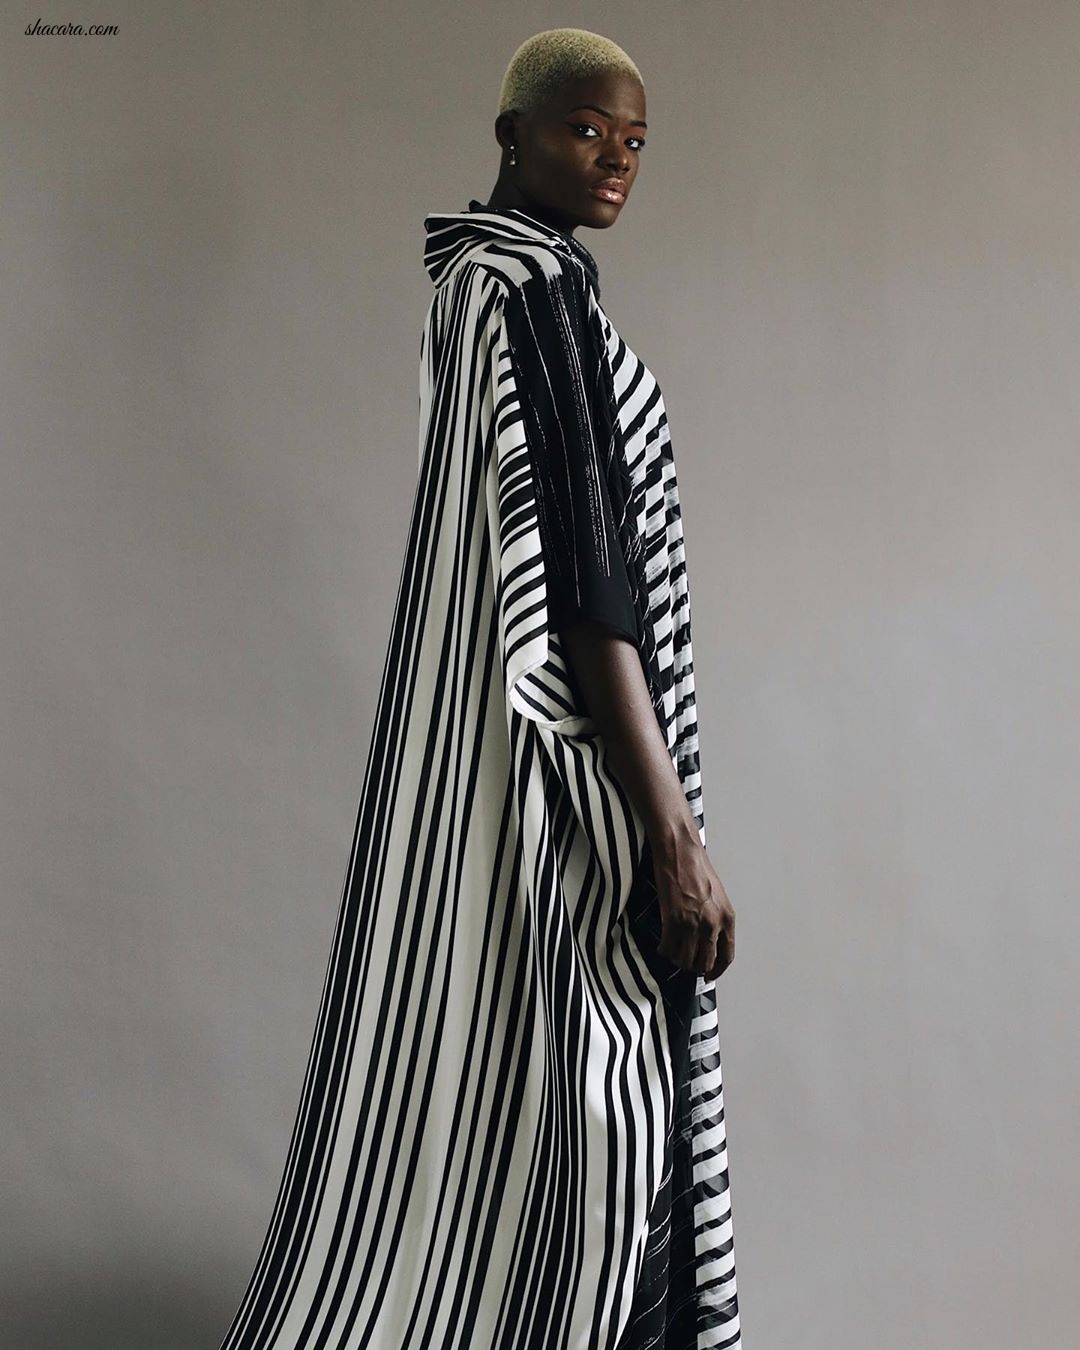 If You Love African Kantans Feast On These New Beautiful Pieces By Senegalese Brand Madeleine Darabie